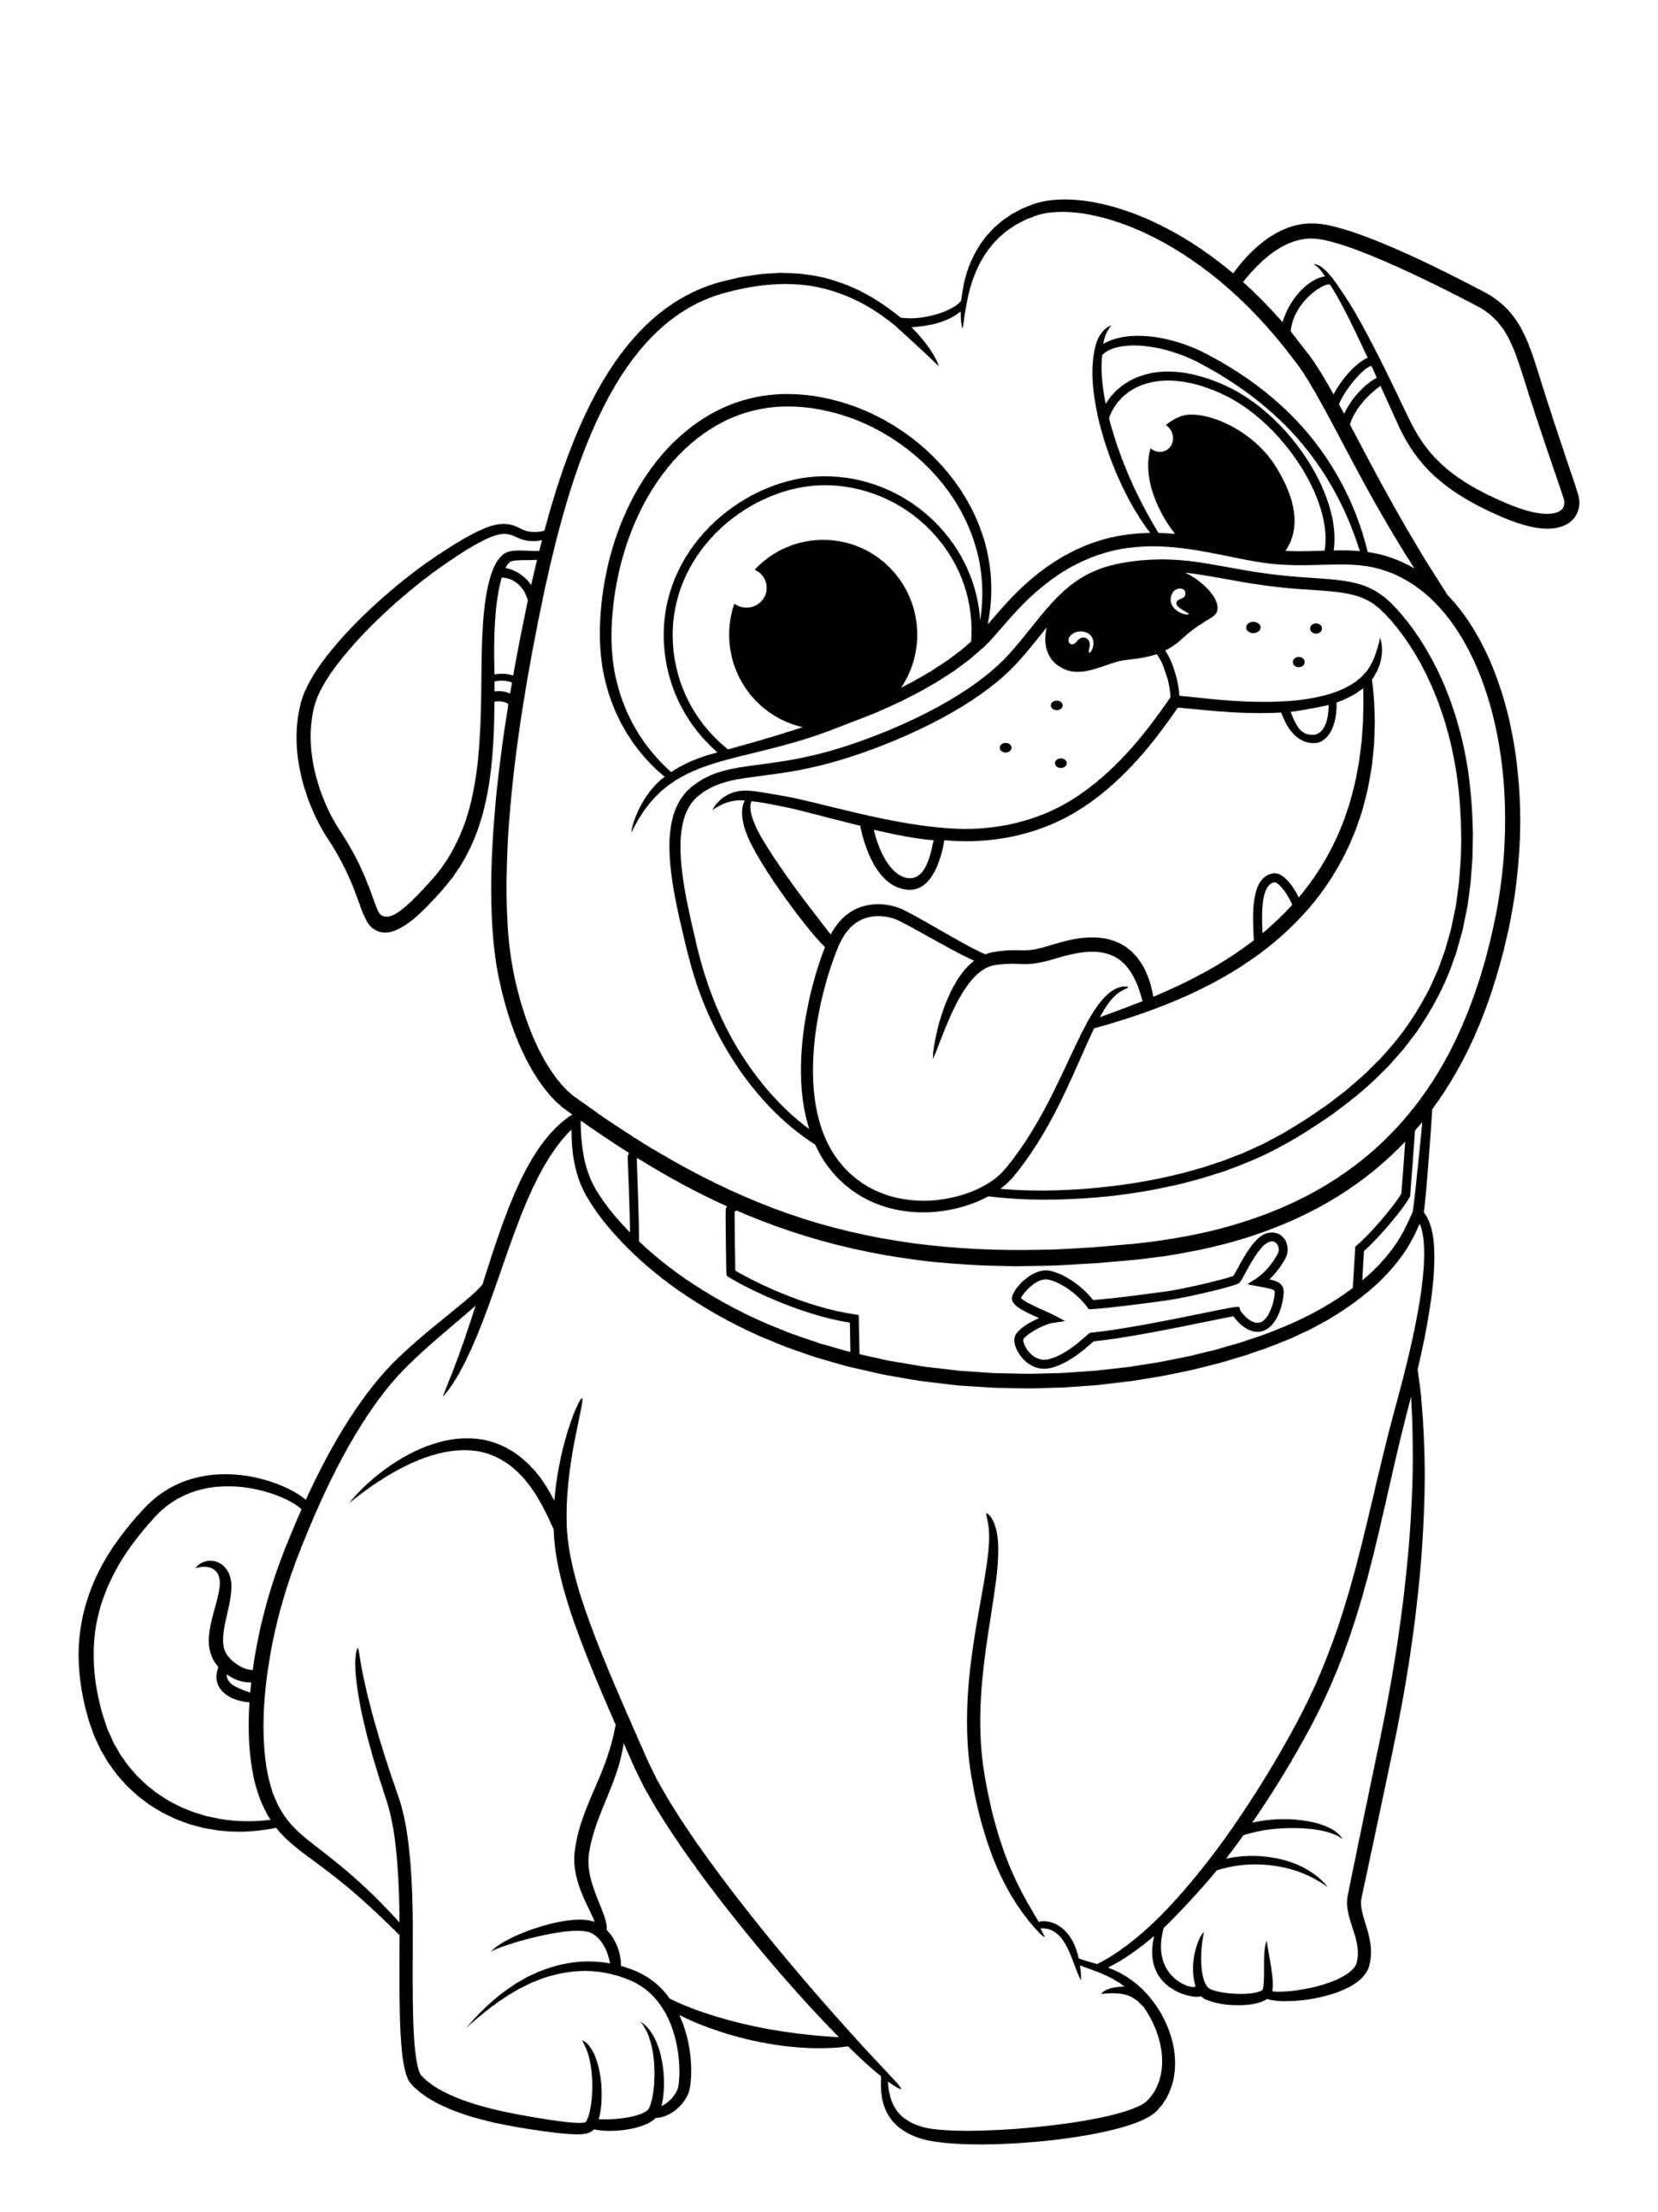 Printable Pictures To Color Of Dogs